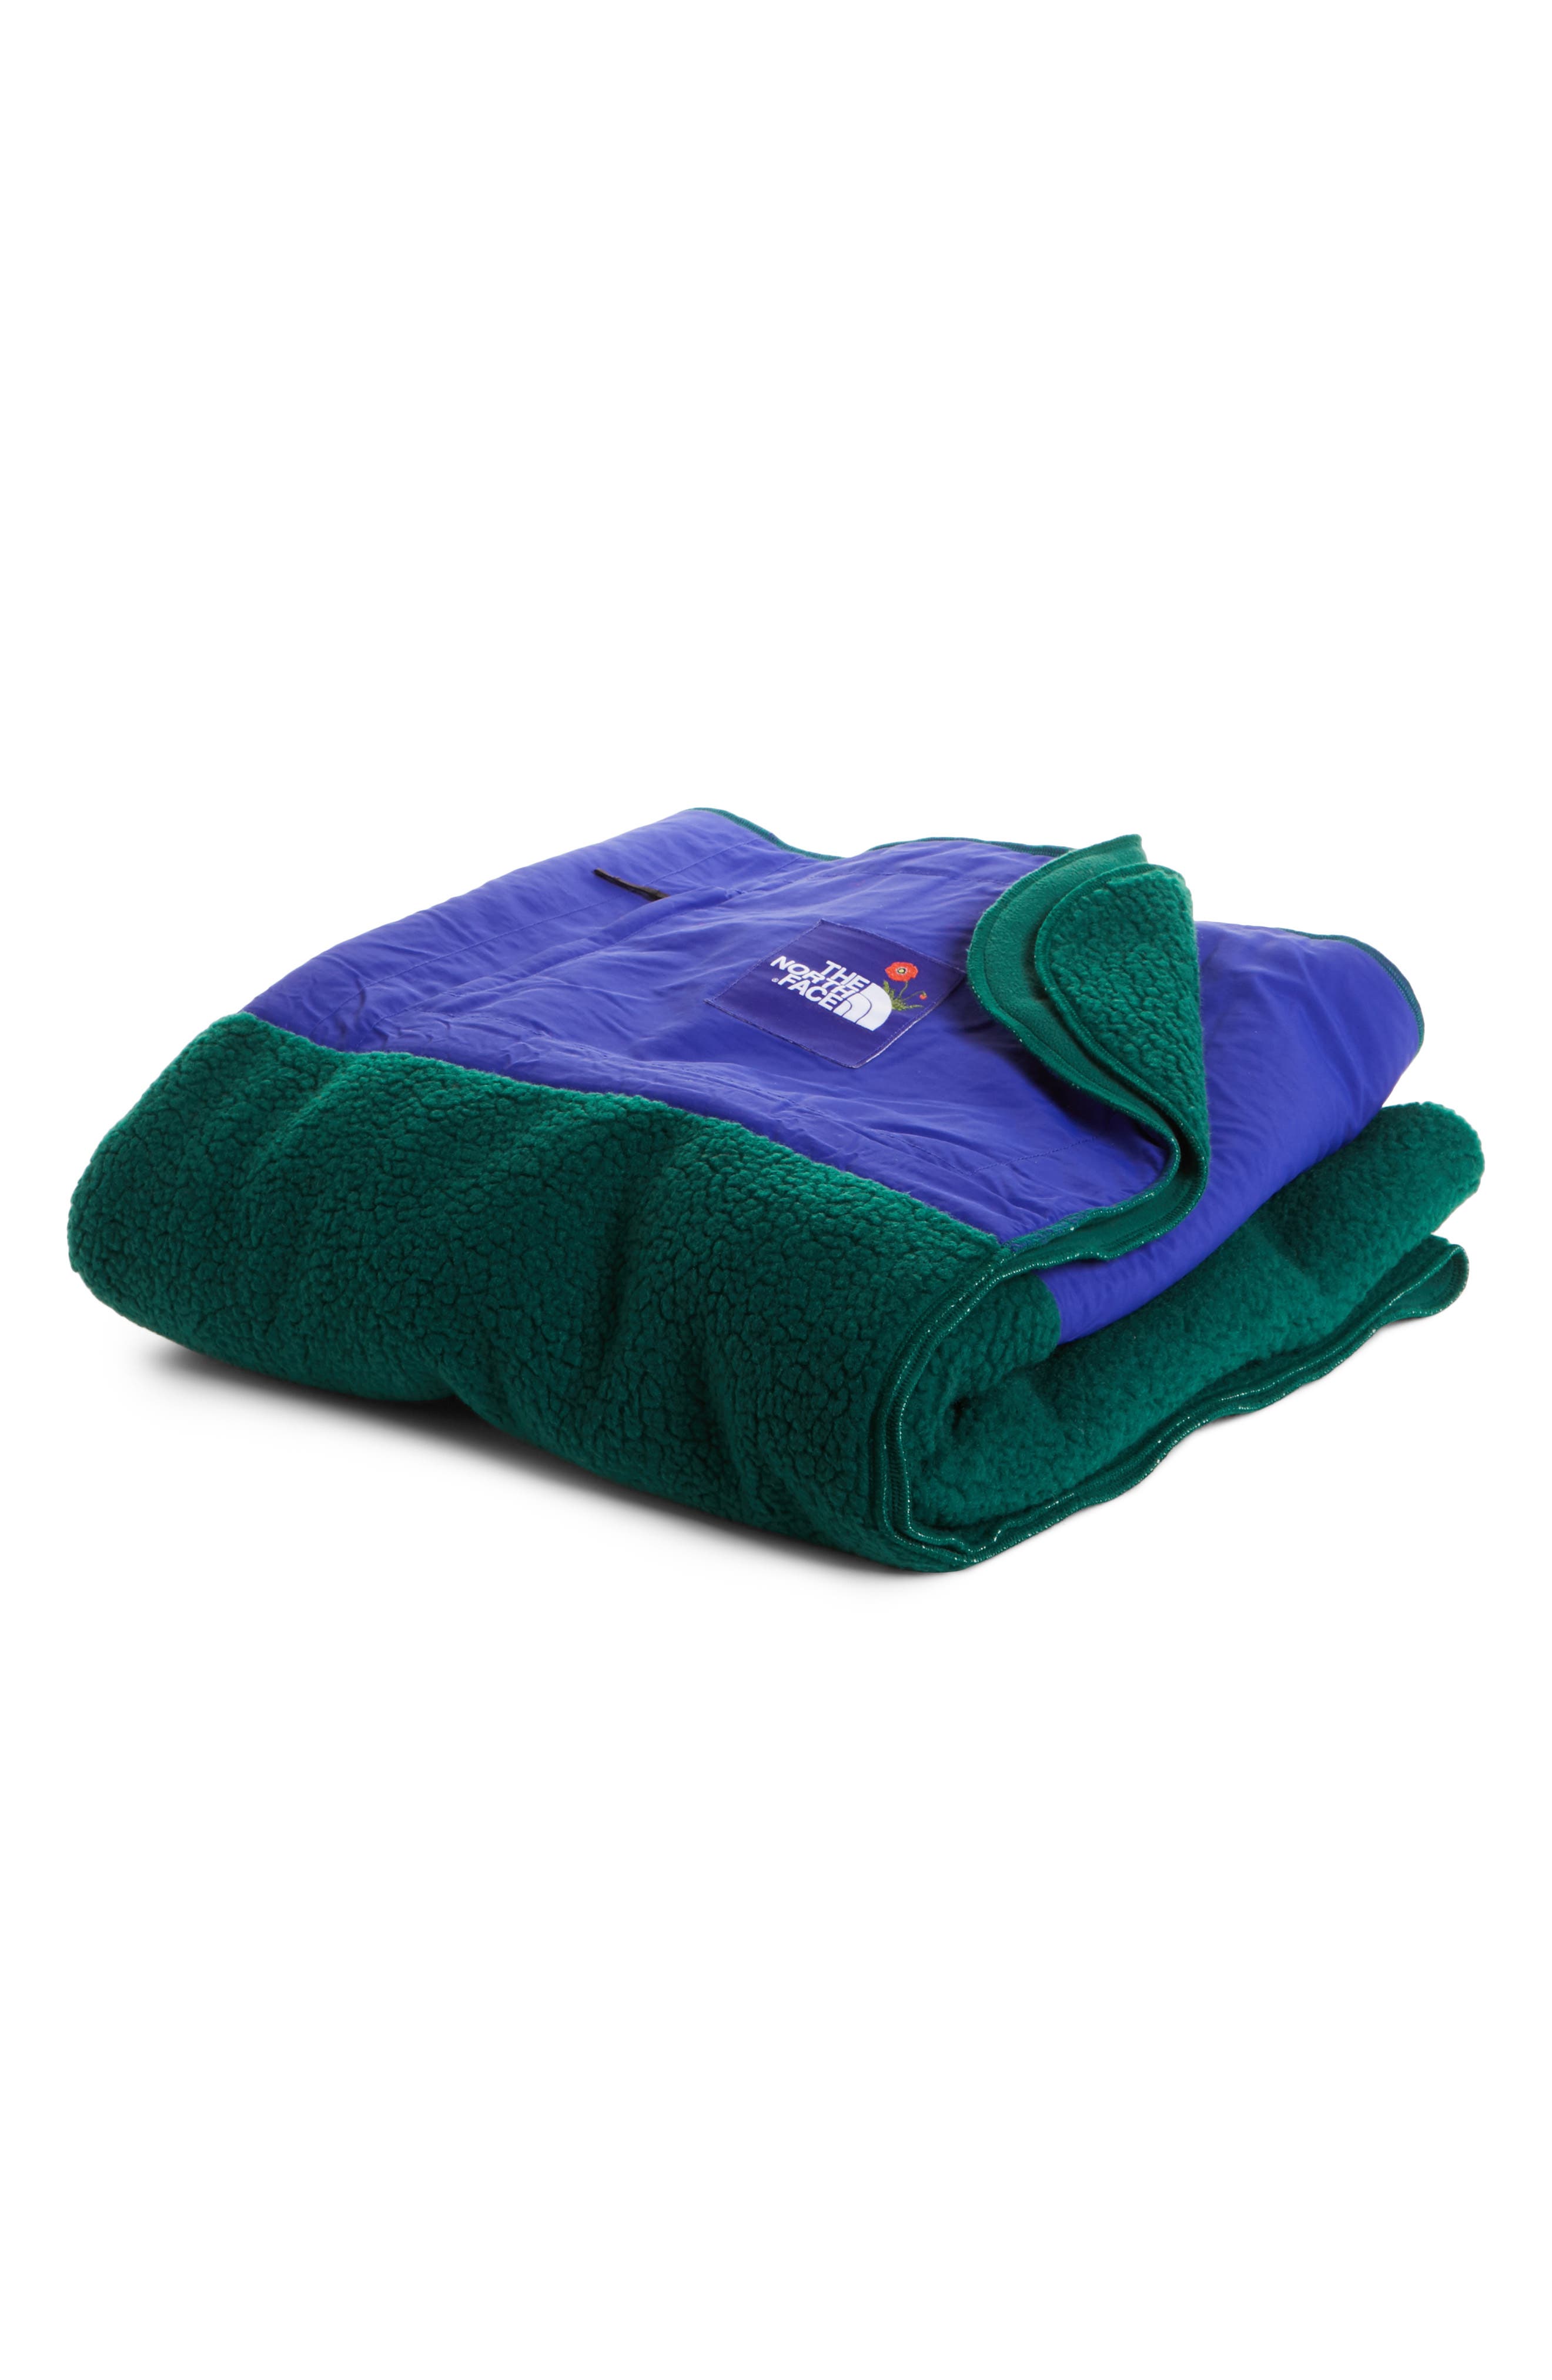 north face thermoball blanket